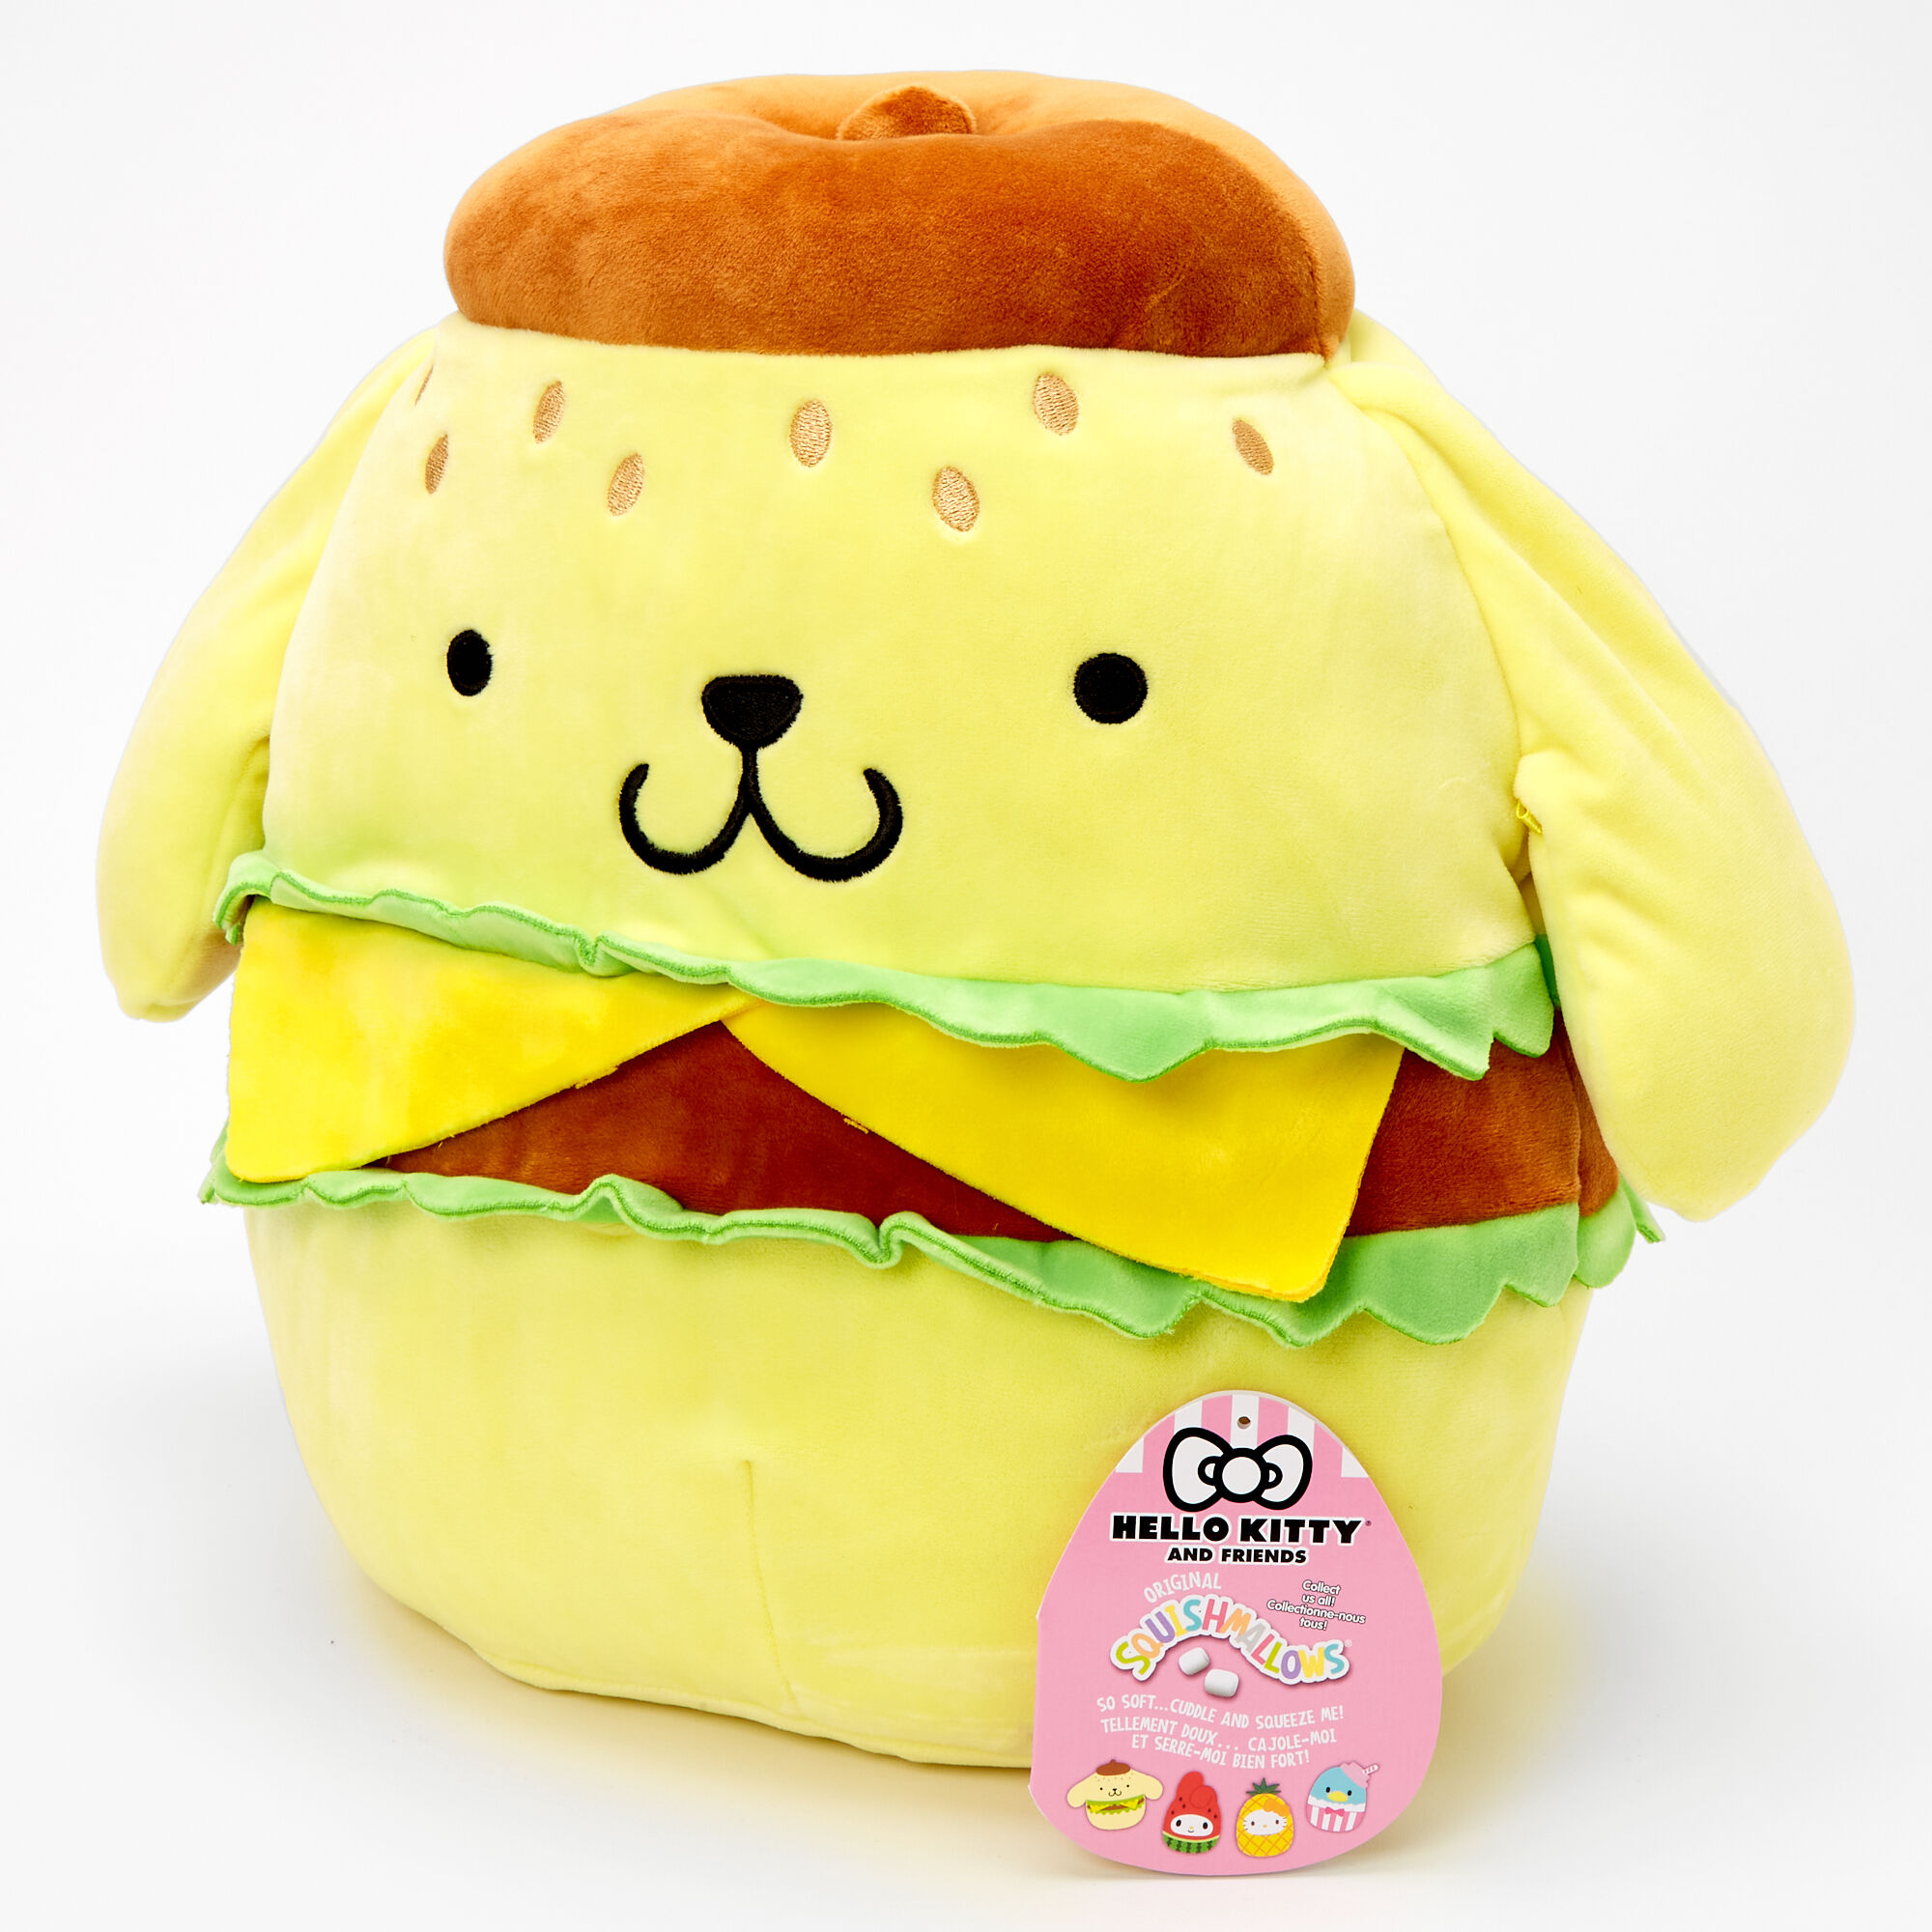 NEW Claires Exclusive Cheese Burger 5 Inch Squishmallow Toy Plush